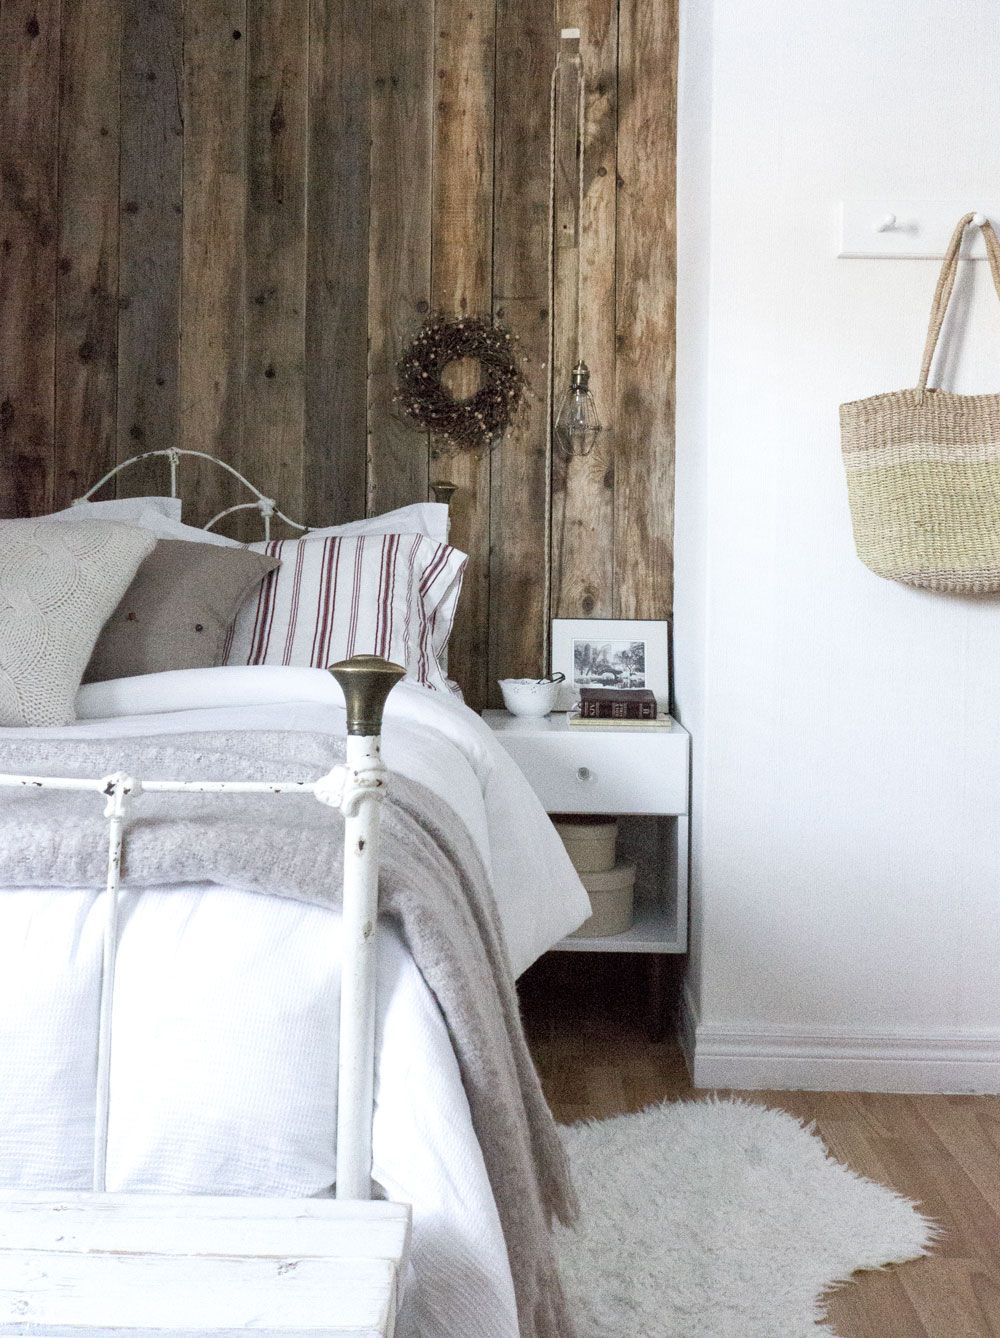 10 Stunning Guest Room Ideas Decor You Need to See to Believe